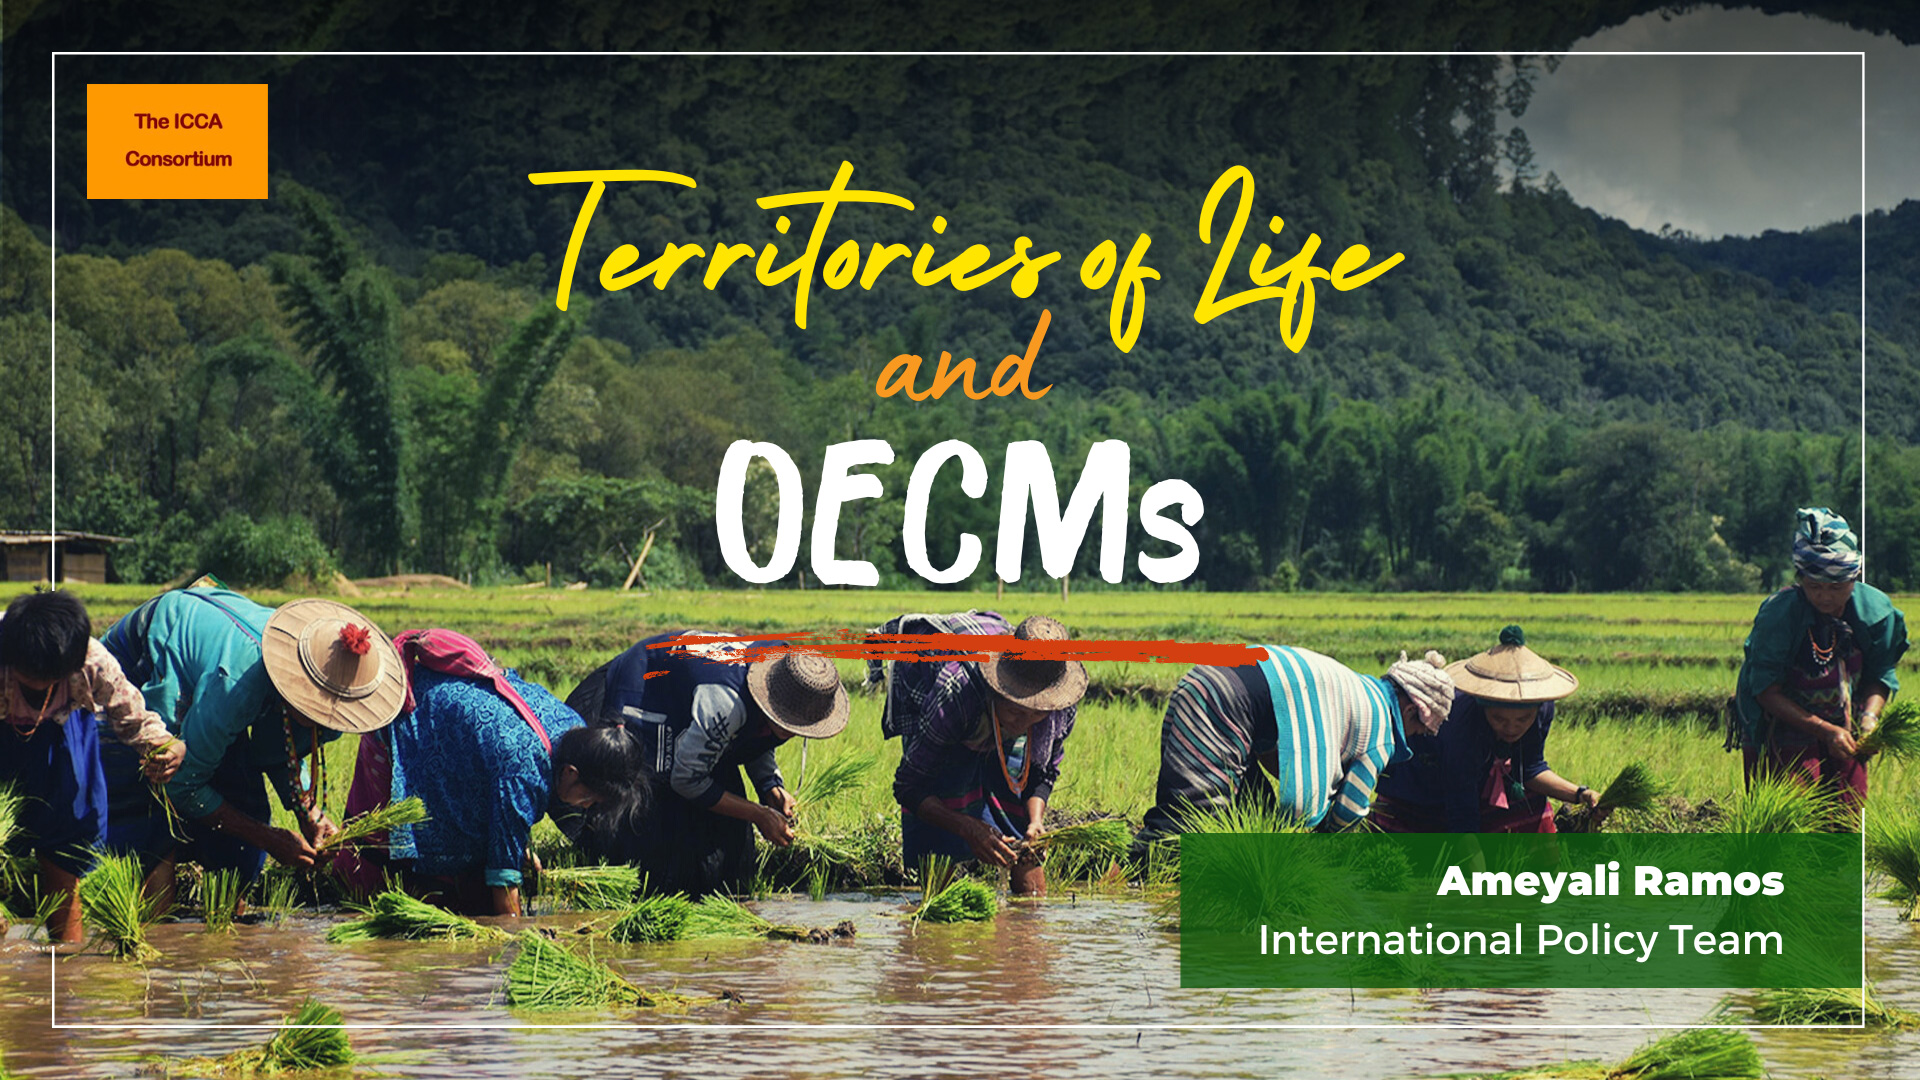 Territories of life and OECMs: reflections and recommendations from in-country experience